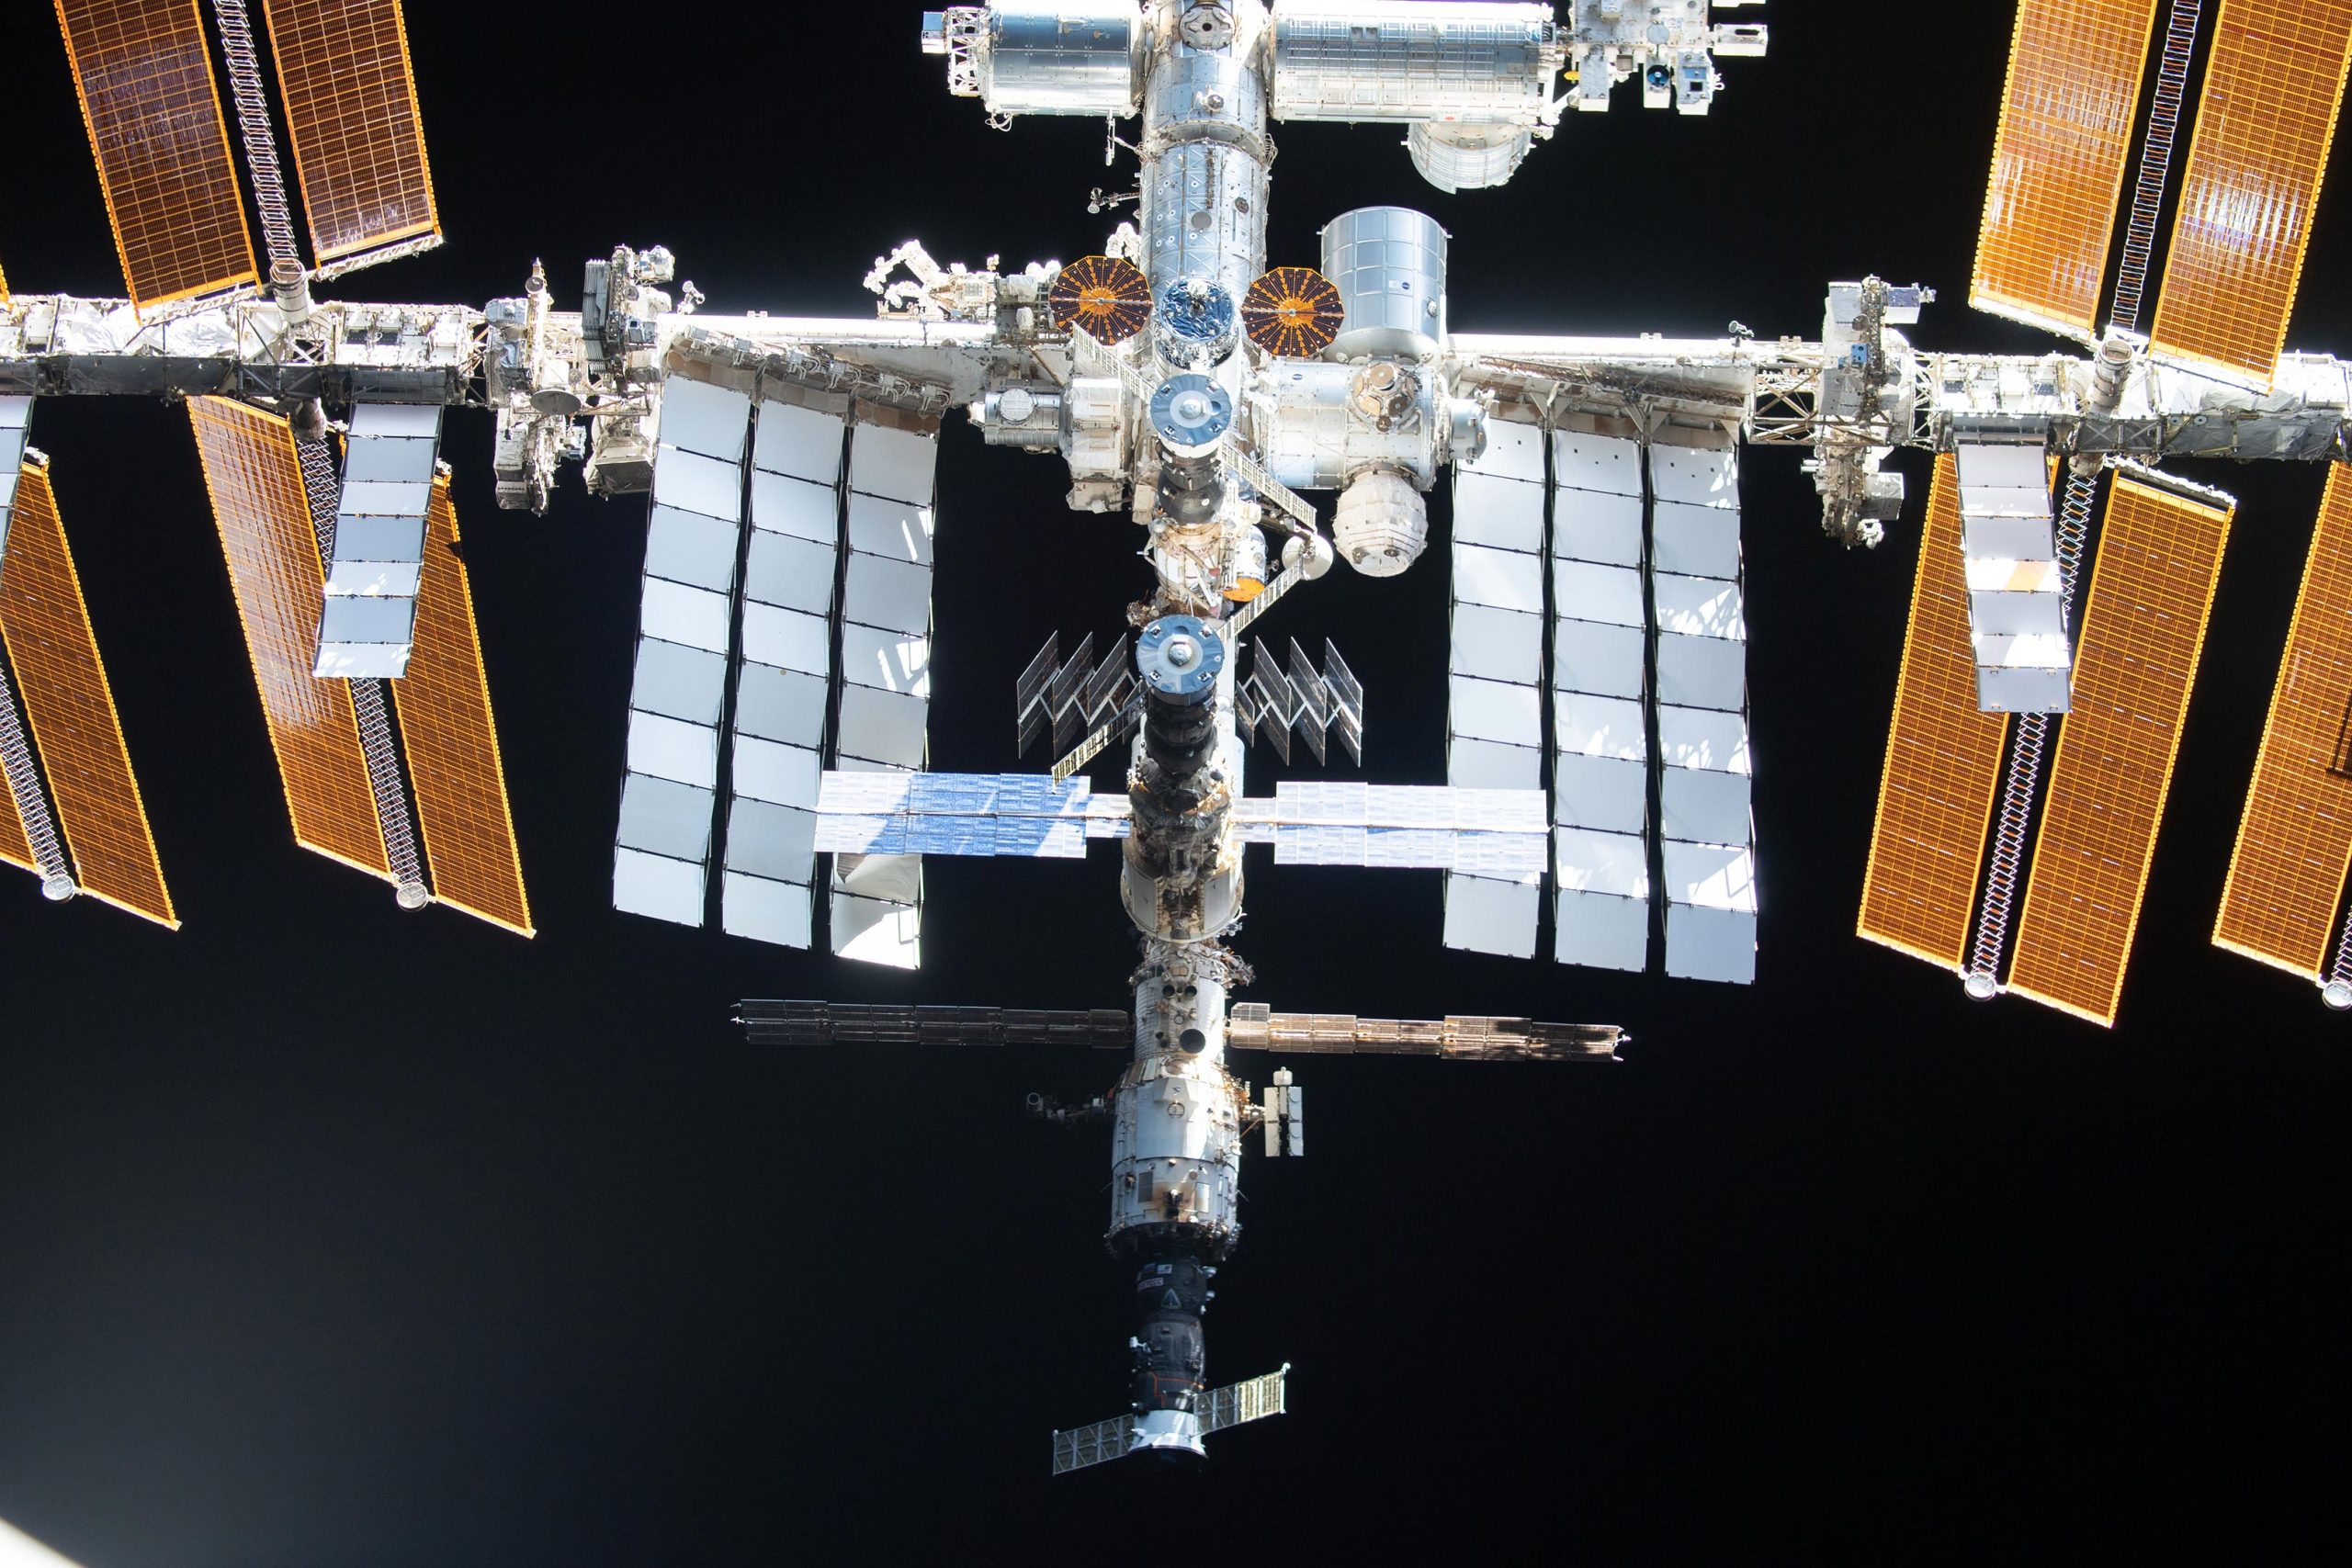 Ultrasonic Exploration and Space Psychology Kick Off the Week on ISS thumbnail